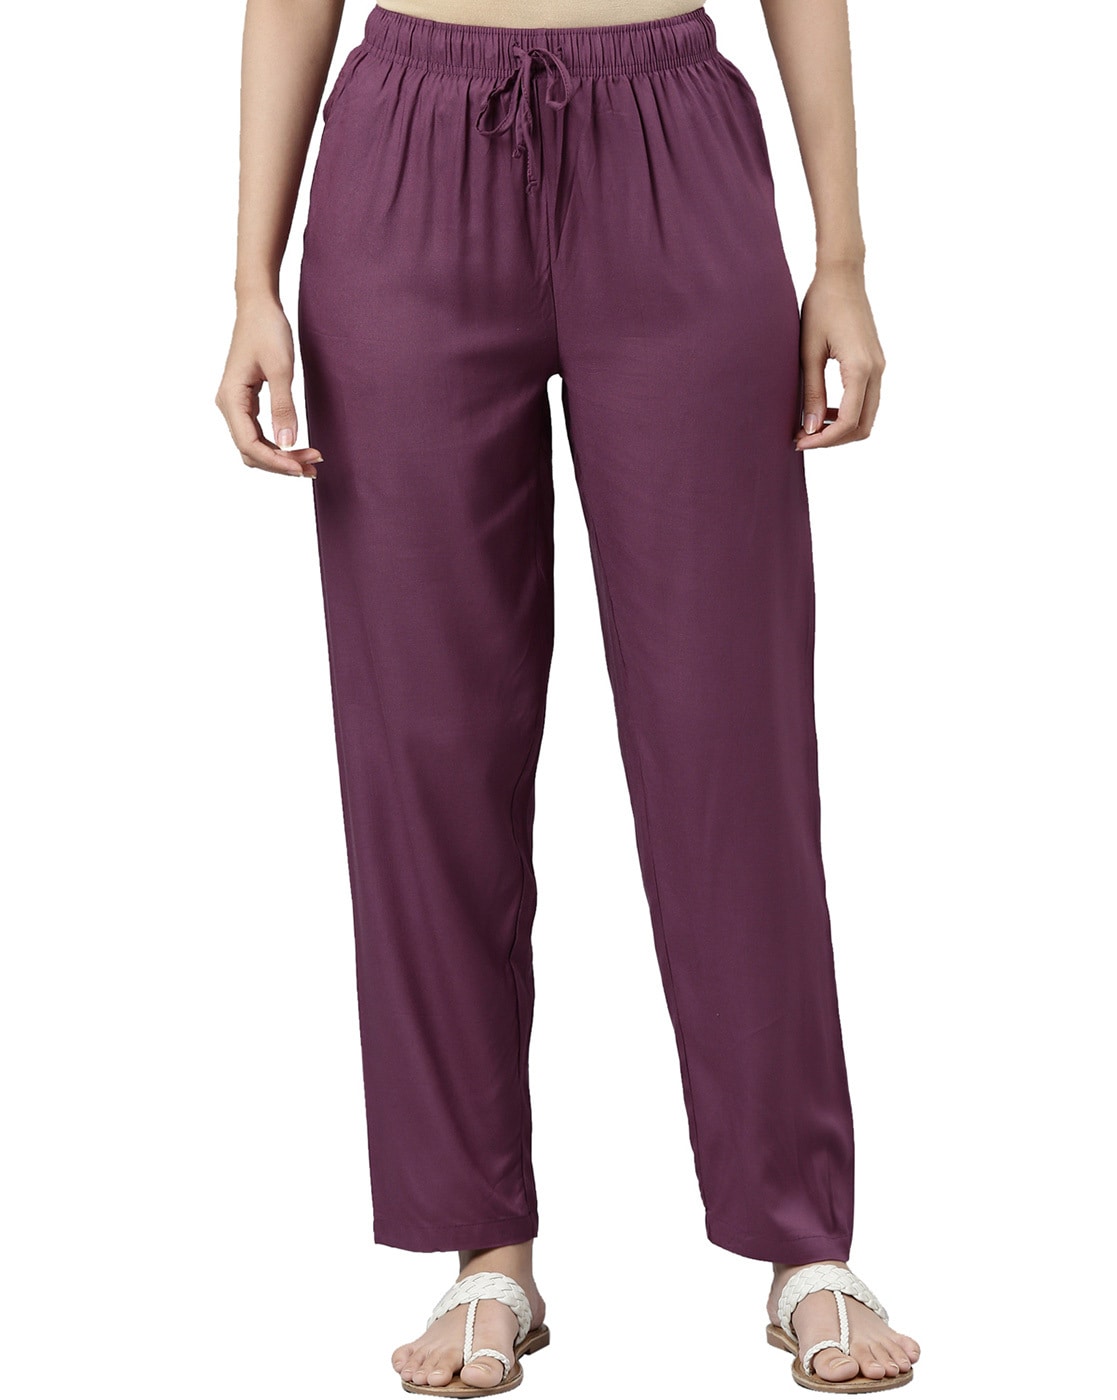 Solly Jeans Co Trousers & Chinos, Allen Solly Purple Trousers for Men at  Allensolly.com